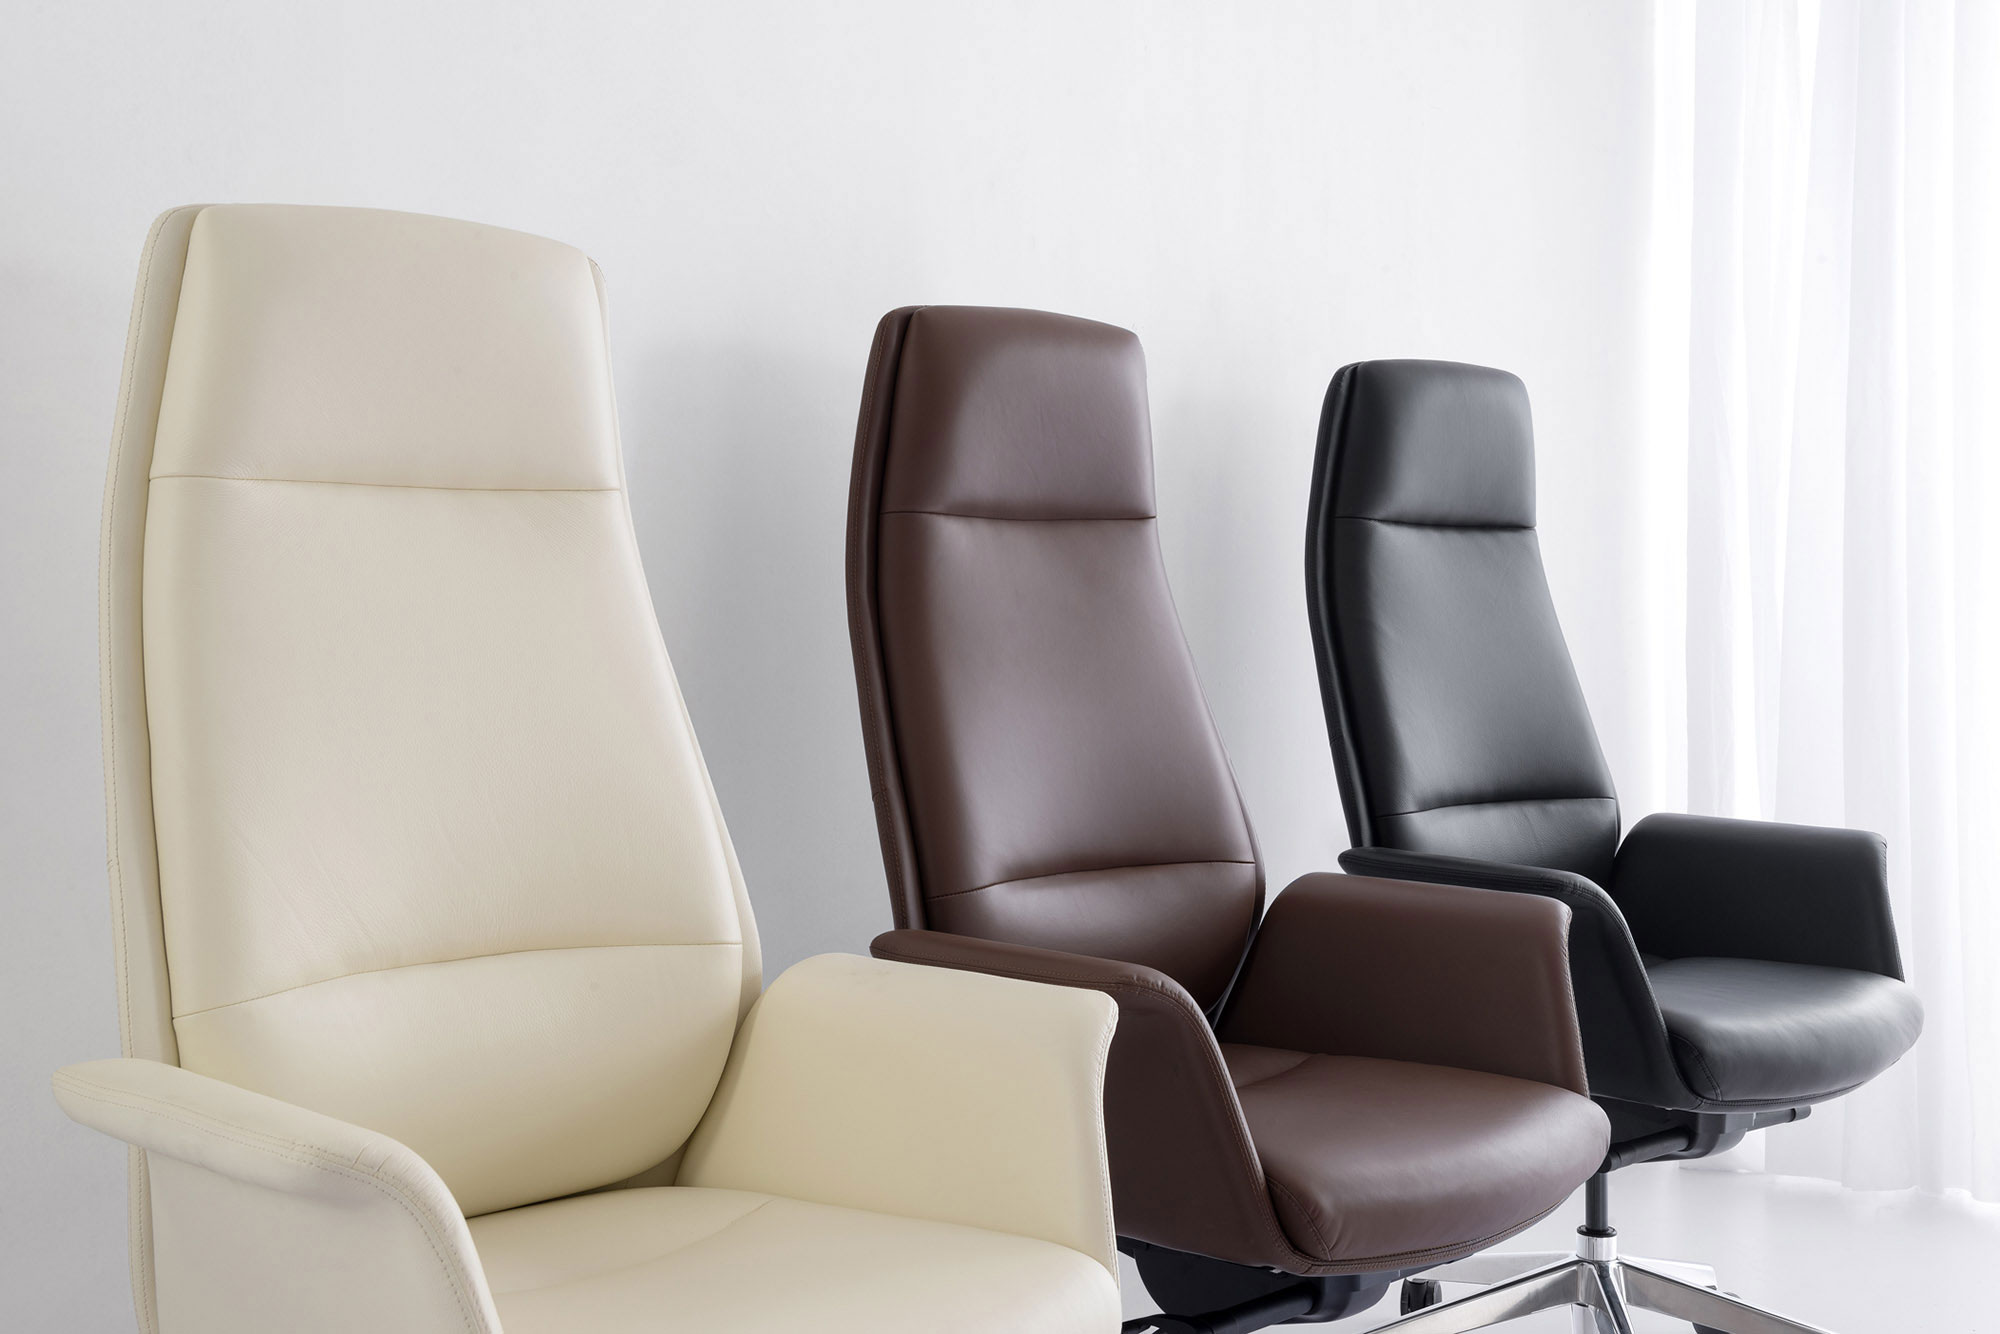 Leather executive chairs in off-white, brown and black